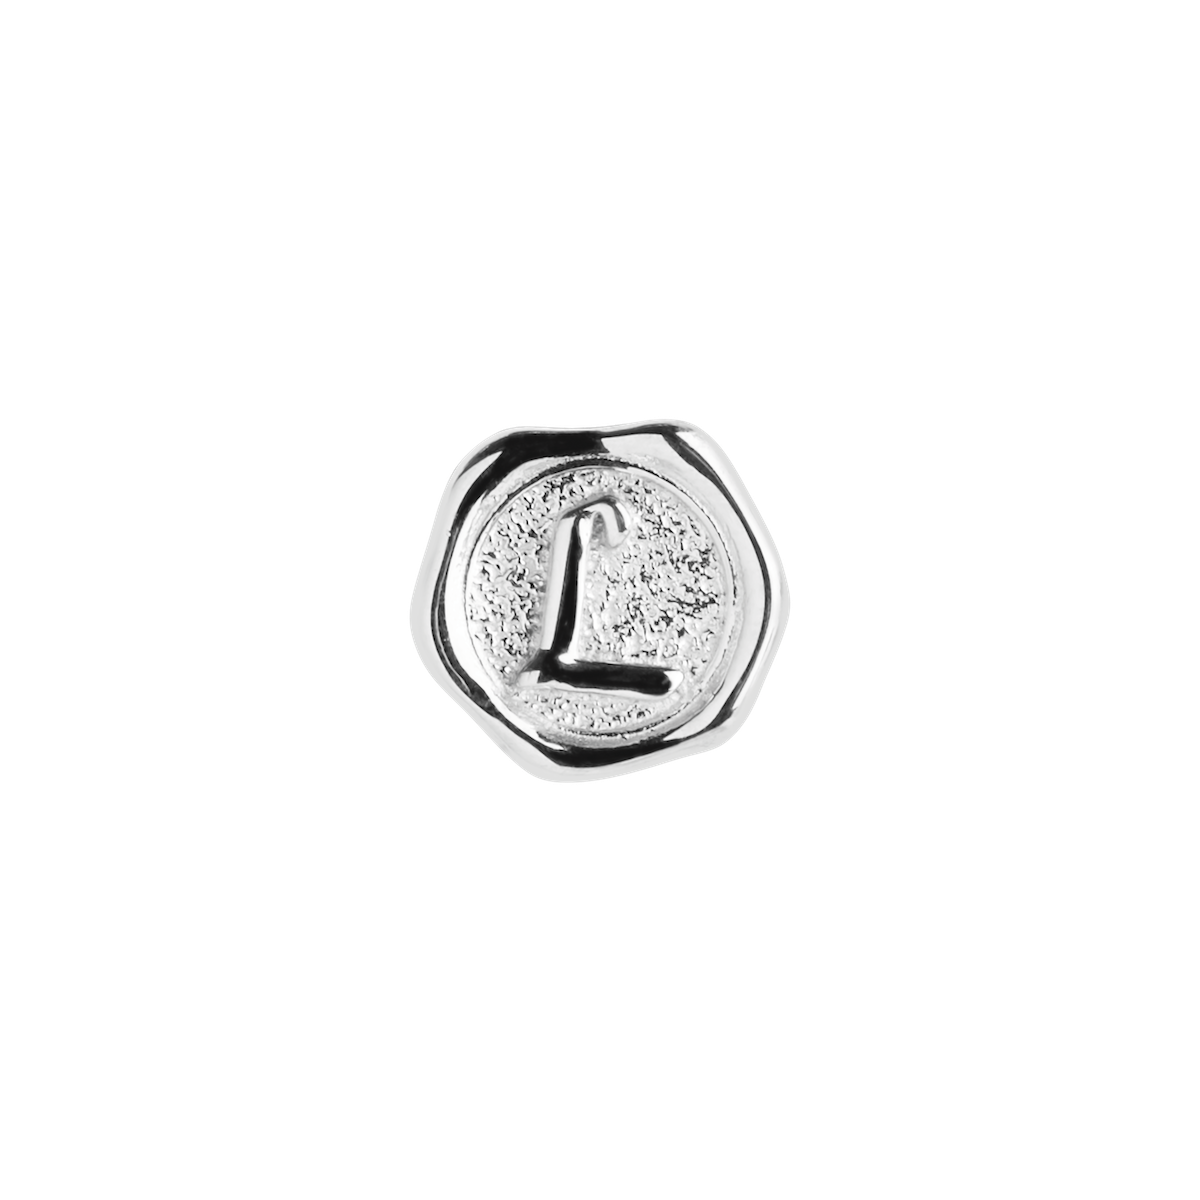 Letter Coin